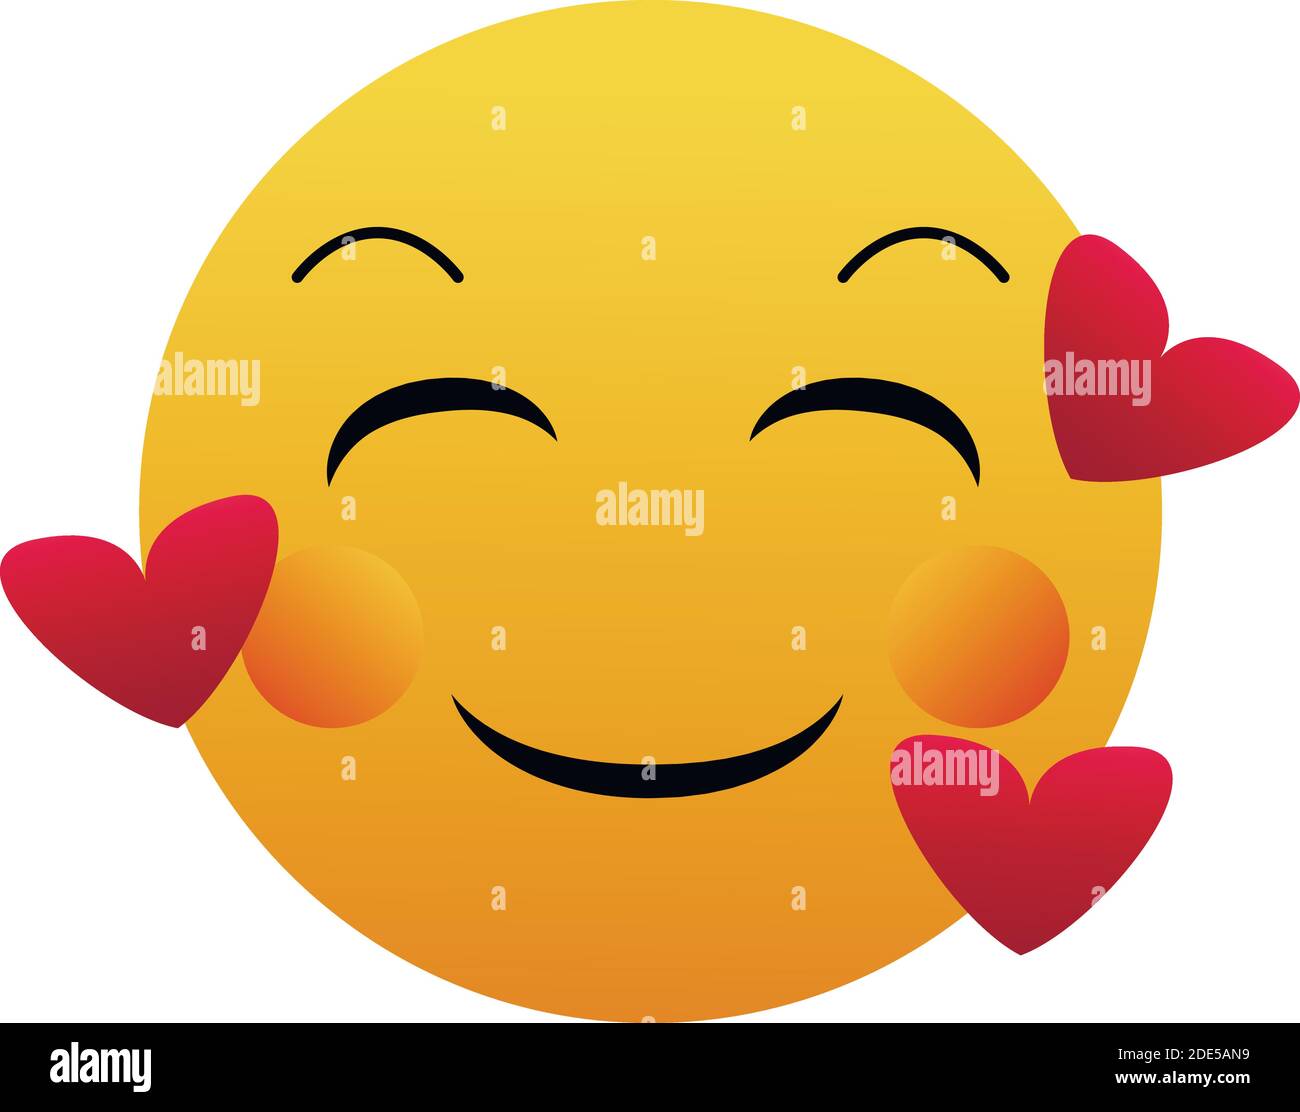 Emoji with hearts - in love face - emoticon face with smiling eyes, rosy  cheeks, and three hearts floating around its head - expresses happy,  affectio Stock Vector Image & Art - Alamy